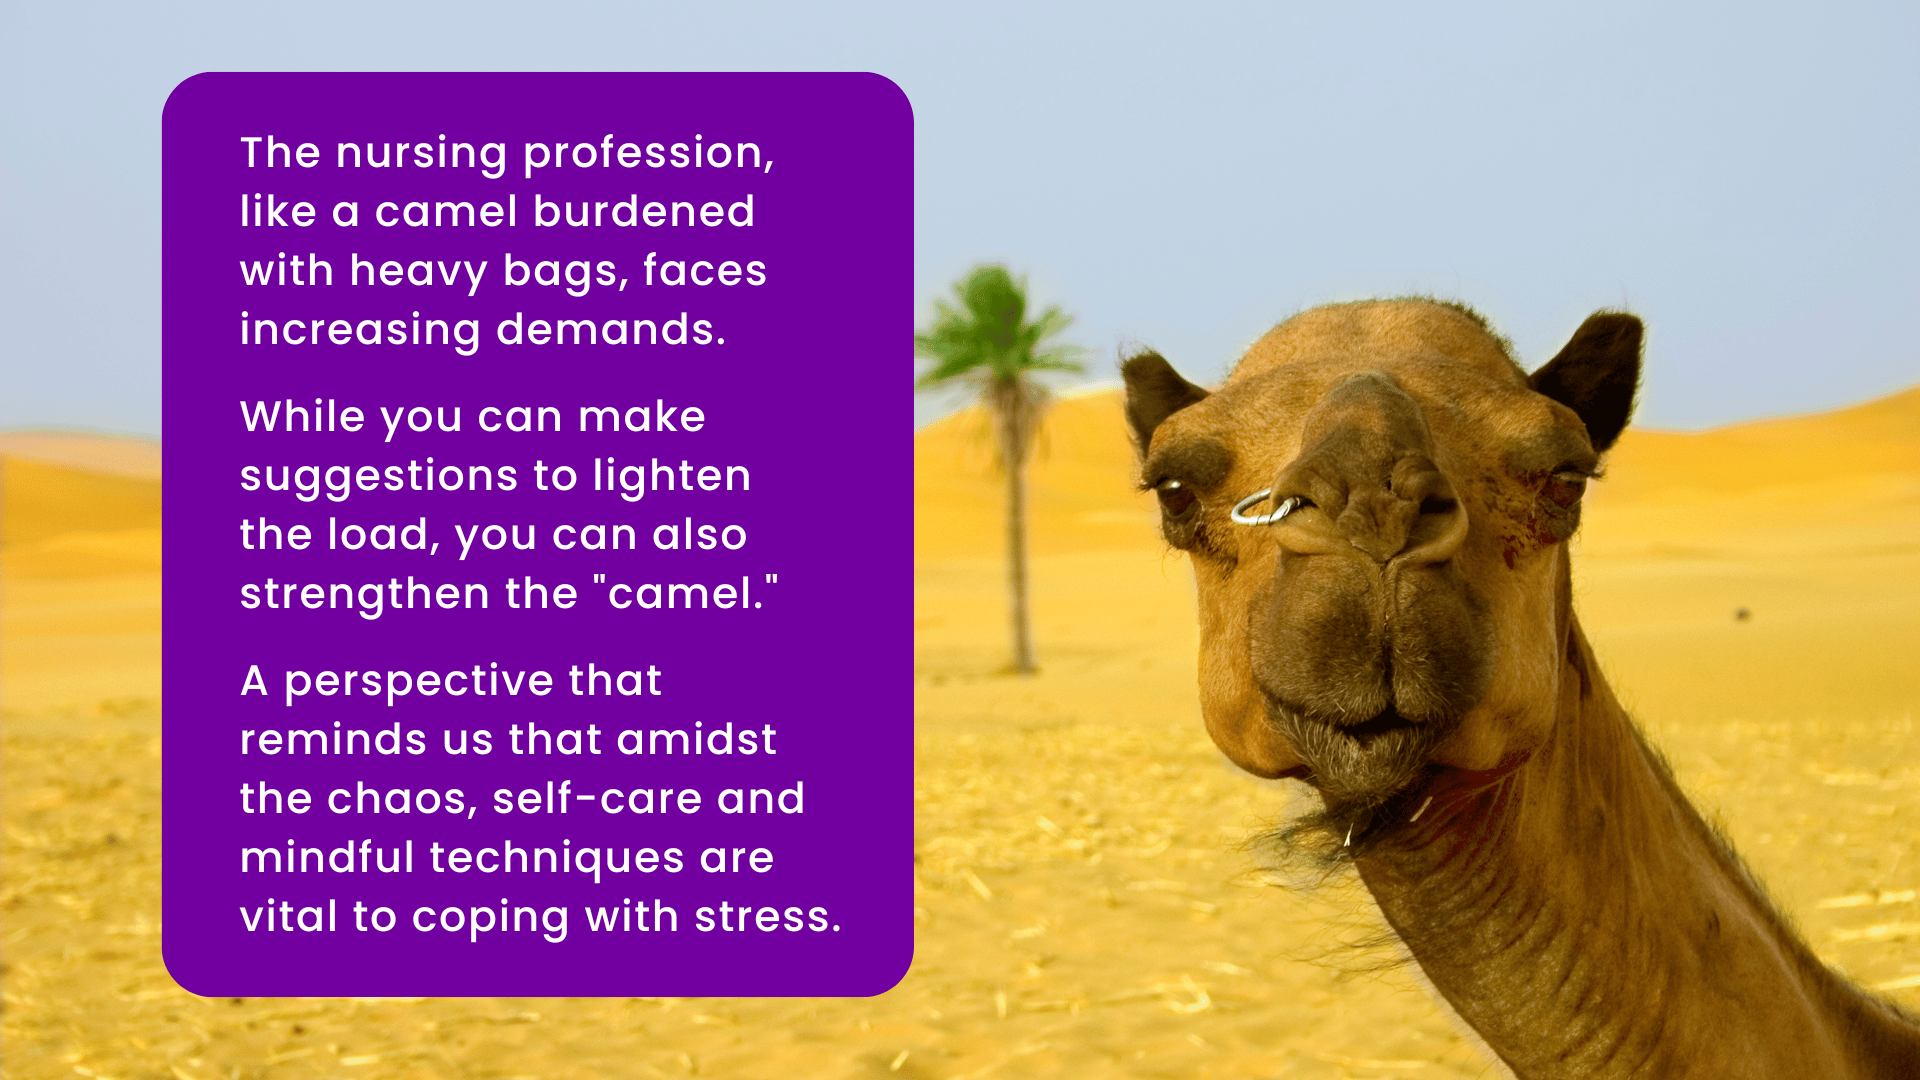 A photo of a camel in the desert with text that explains how the nursing profession, like a camel burdened with heavy bags, faces increasing demands. While nurses can make suggestions to lighten the load, you can also strengthen the "camel." A perspective that reminds us that amidst the chaos, self-care and mindful techniques are vital to coping with stress. 